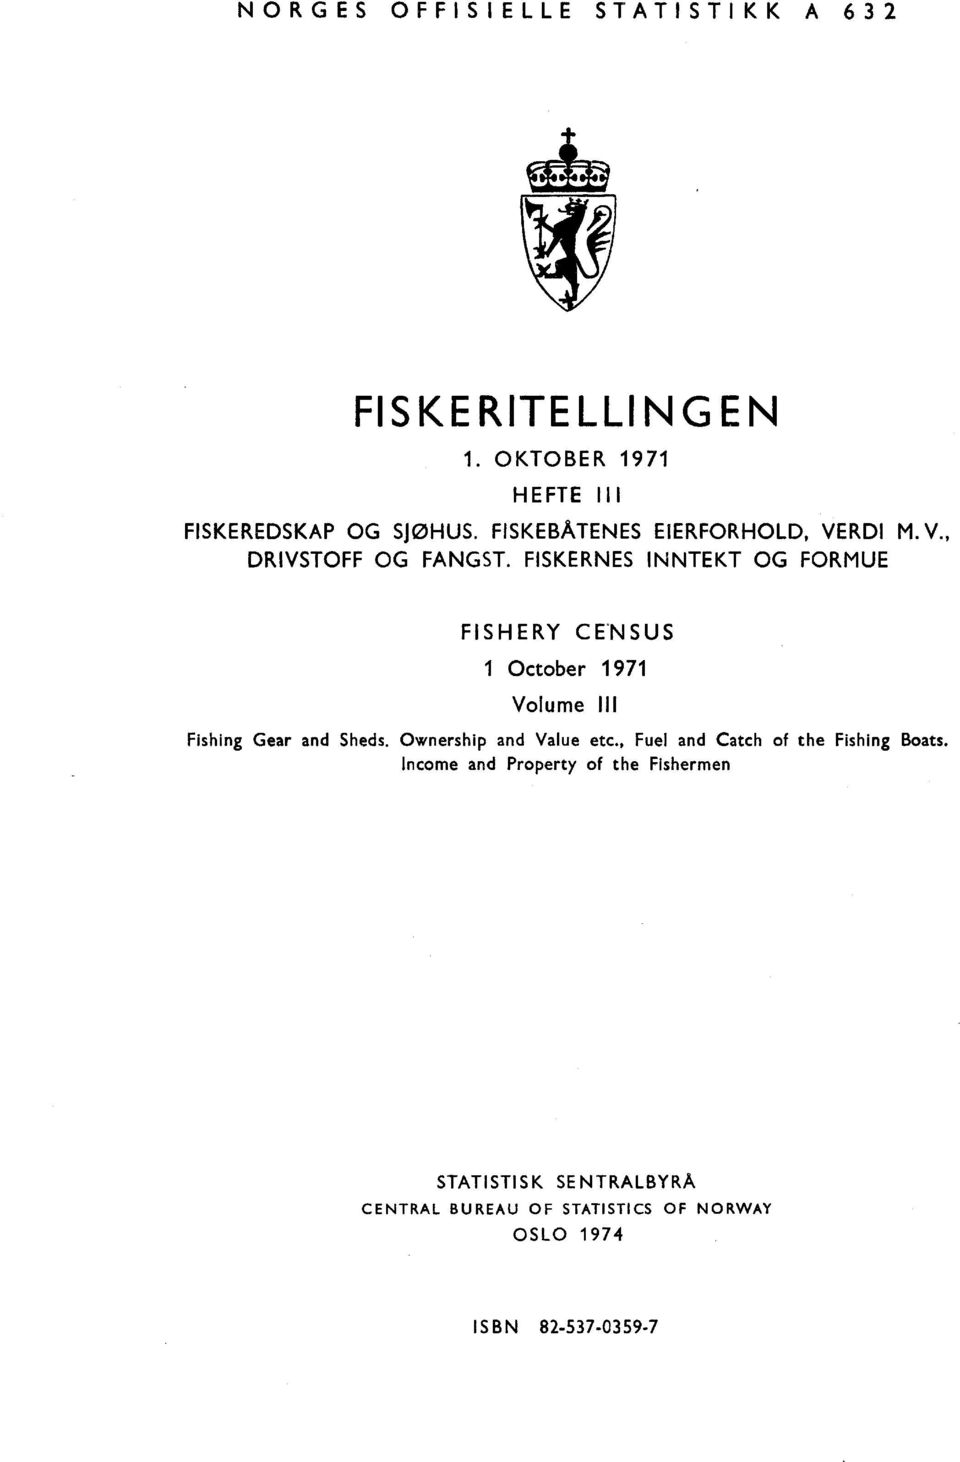 FISKERNES INNTEKT OG FORMUE FISHERY CENSUS October 97 Volume Ill Fishing Gear and Sheds.